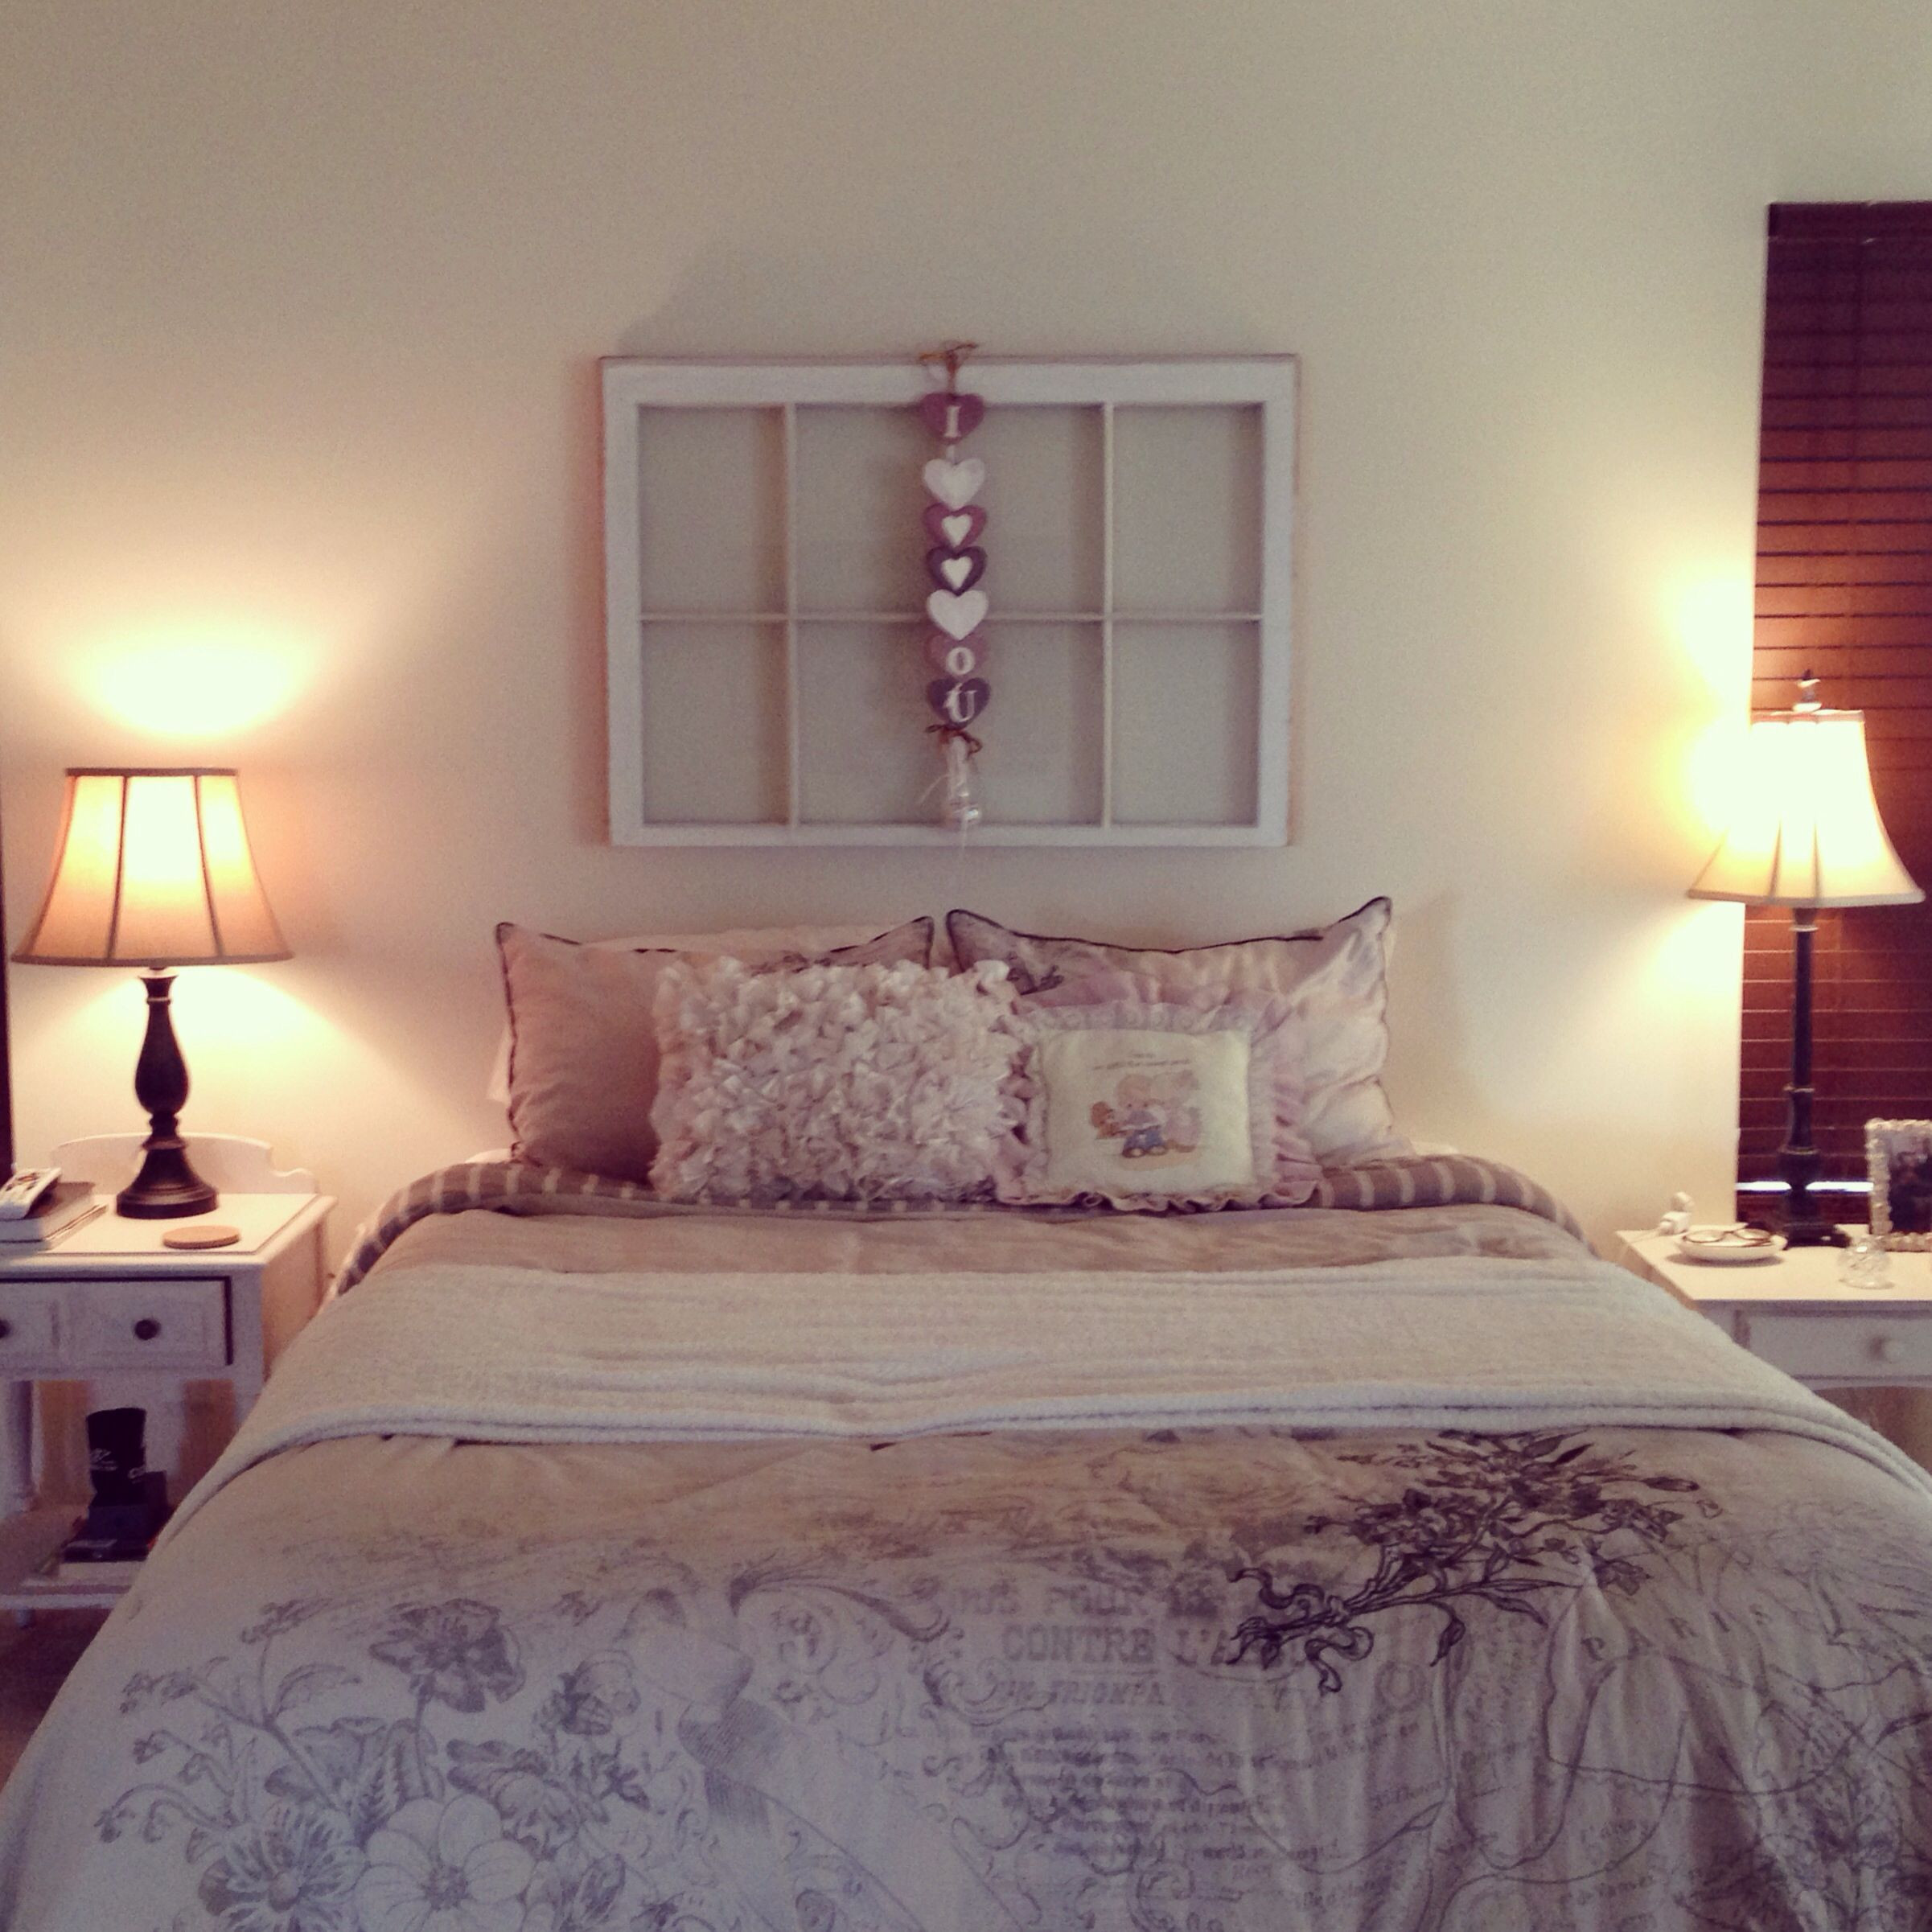 Modern Shabby Chic Bedrooms
 Shabby chic bedroom home ideas